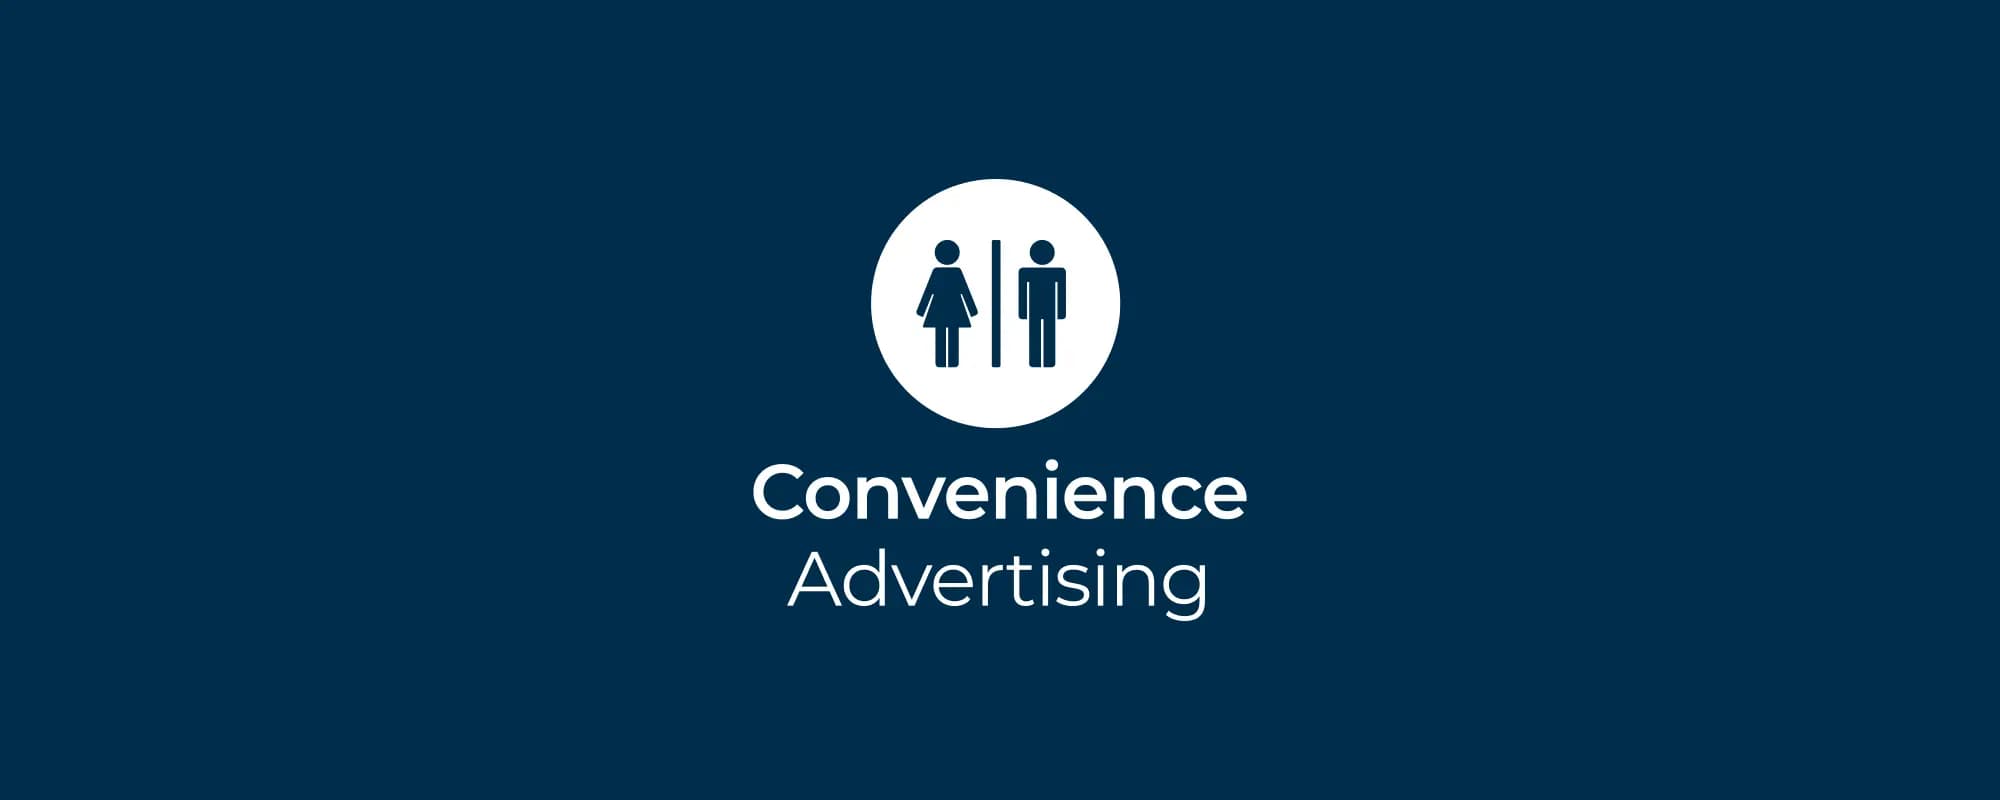 Blog Article Convenience Advertising